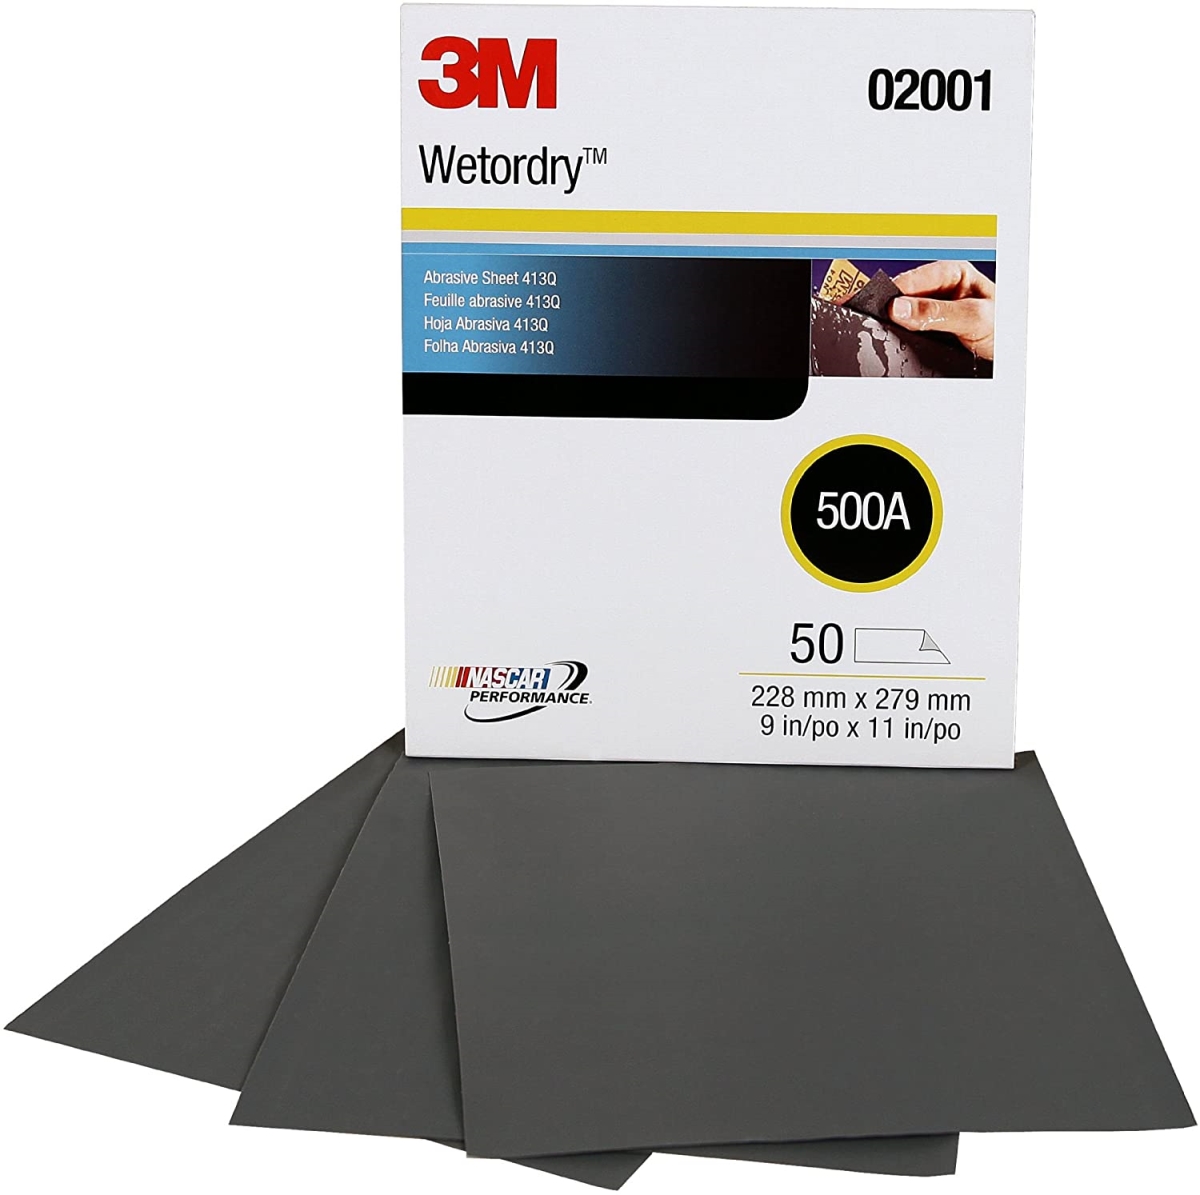 Picture of 3M 3M02001 9 x 11 in. Wetordry Trimite Abrasive Sheet, Silver - Pack of 50